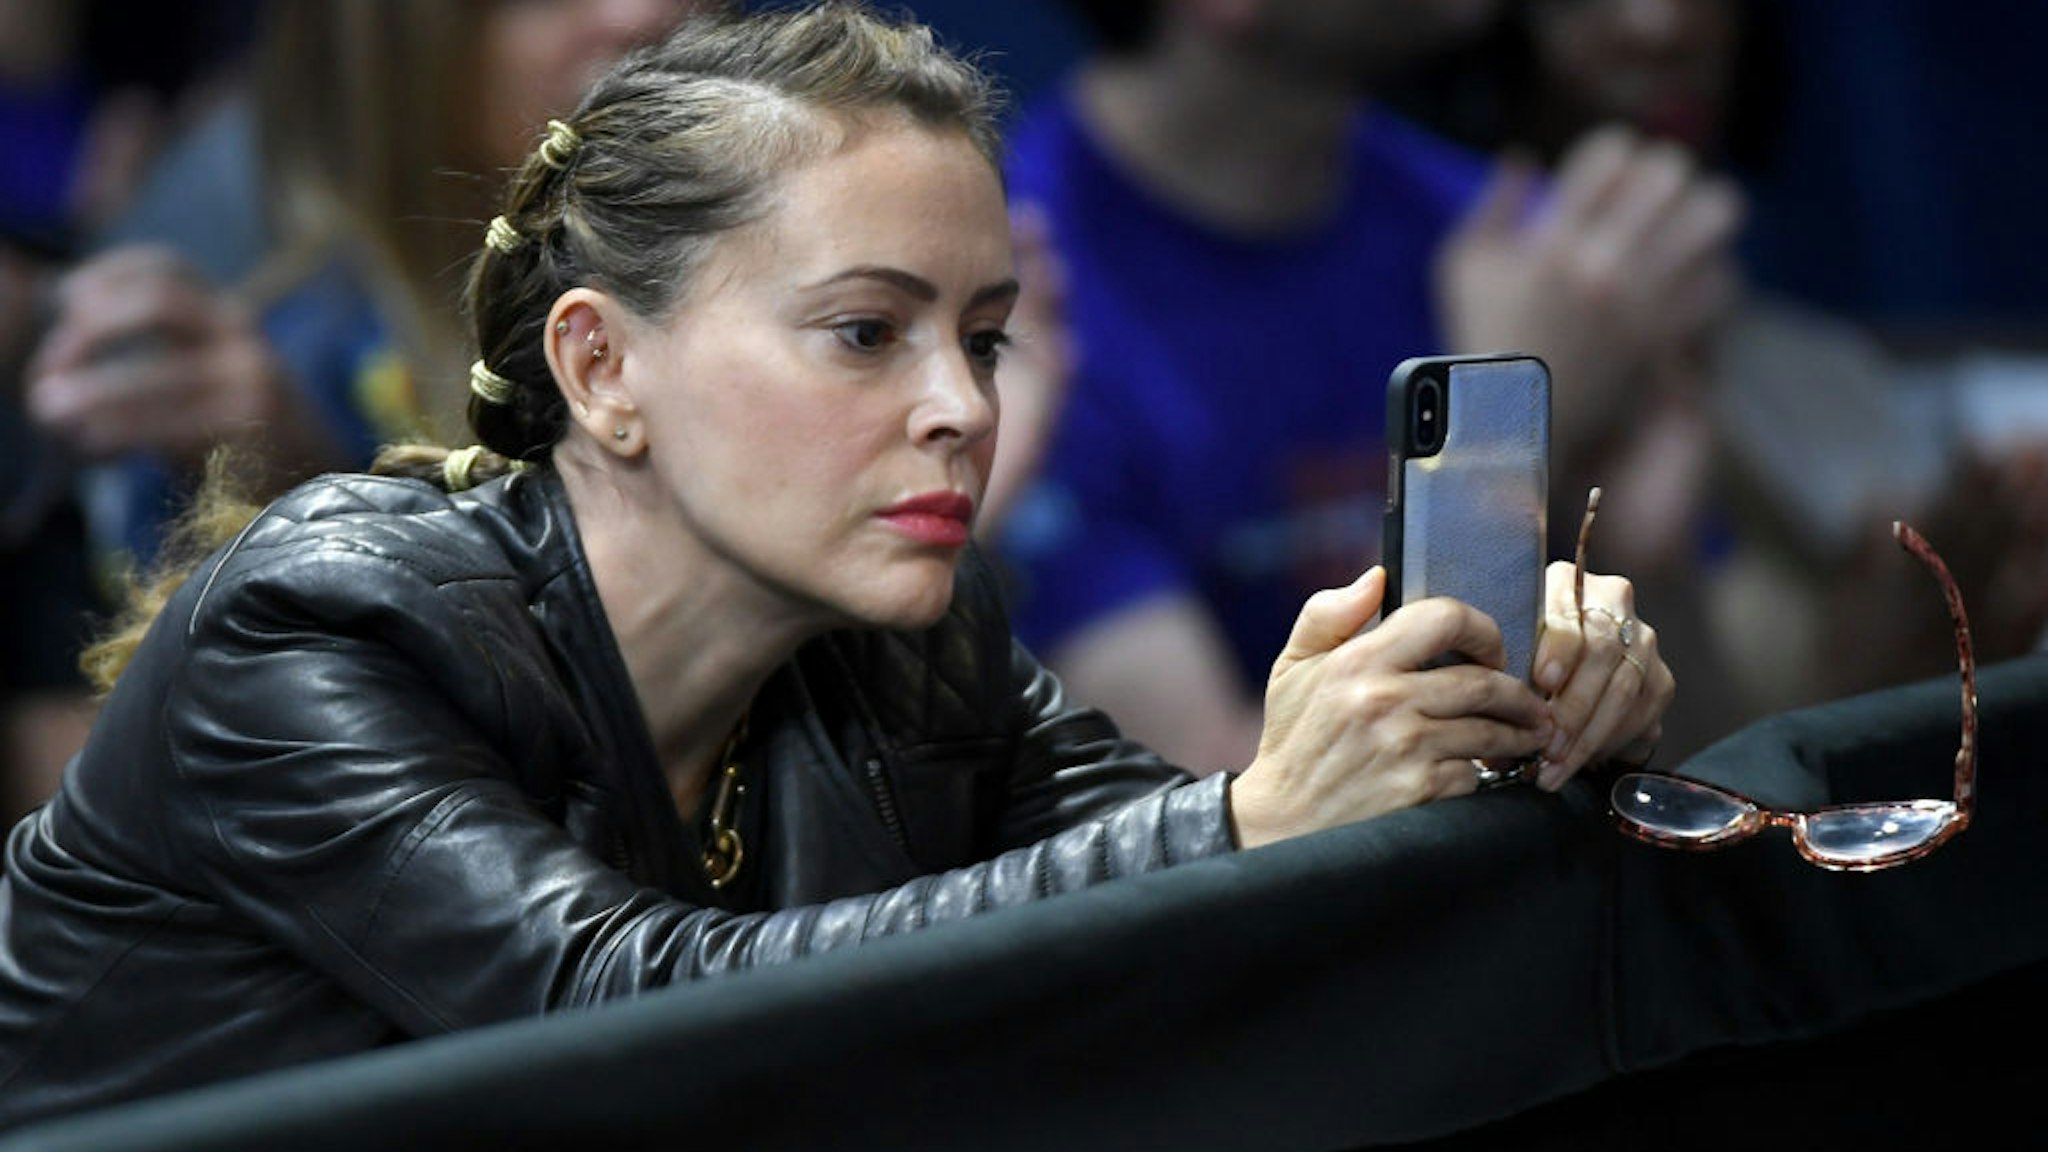 Actress Alyssa Milano records Democratic presidential candidate, entrepreneur Andrew Yang (not pictured) as he speaks during the 2020 Gun Safety Forum hosted by gun control activist groups Giffords and March for Our Lives at Enclave on October 2, 2019 in Las Vegas, Nevada.